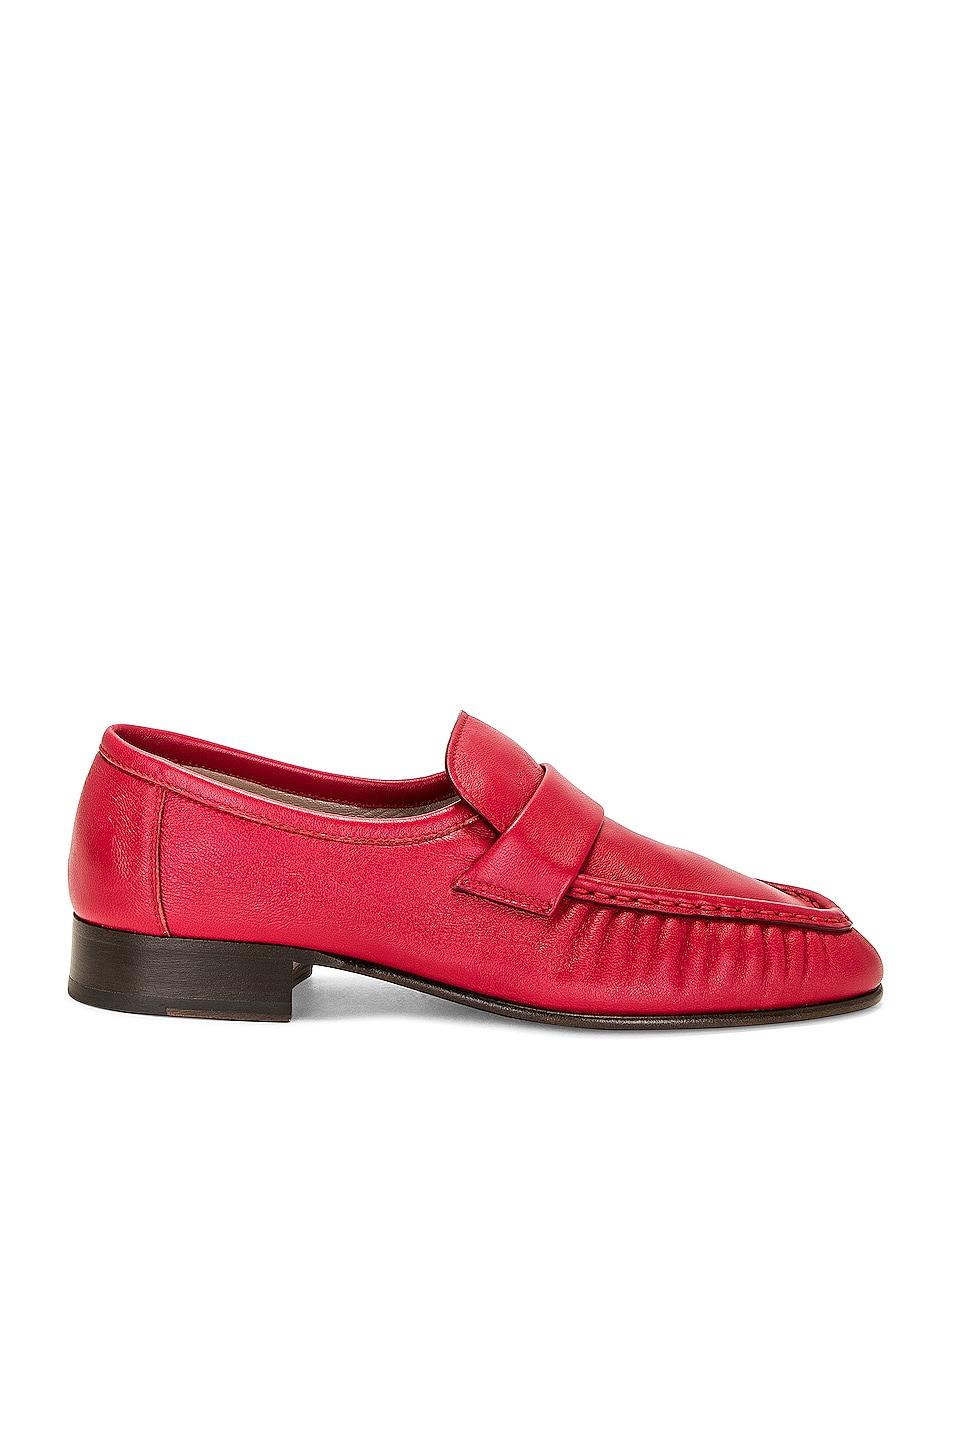 Image 1 of The Row Soft Loafer in Cardinal Red